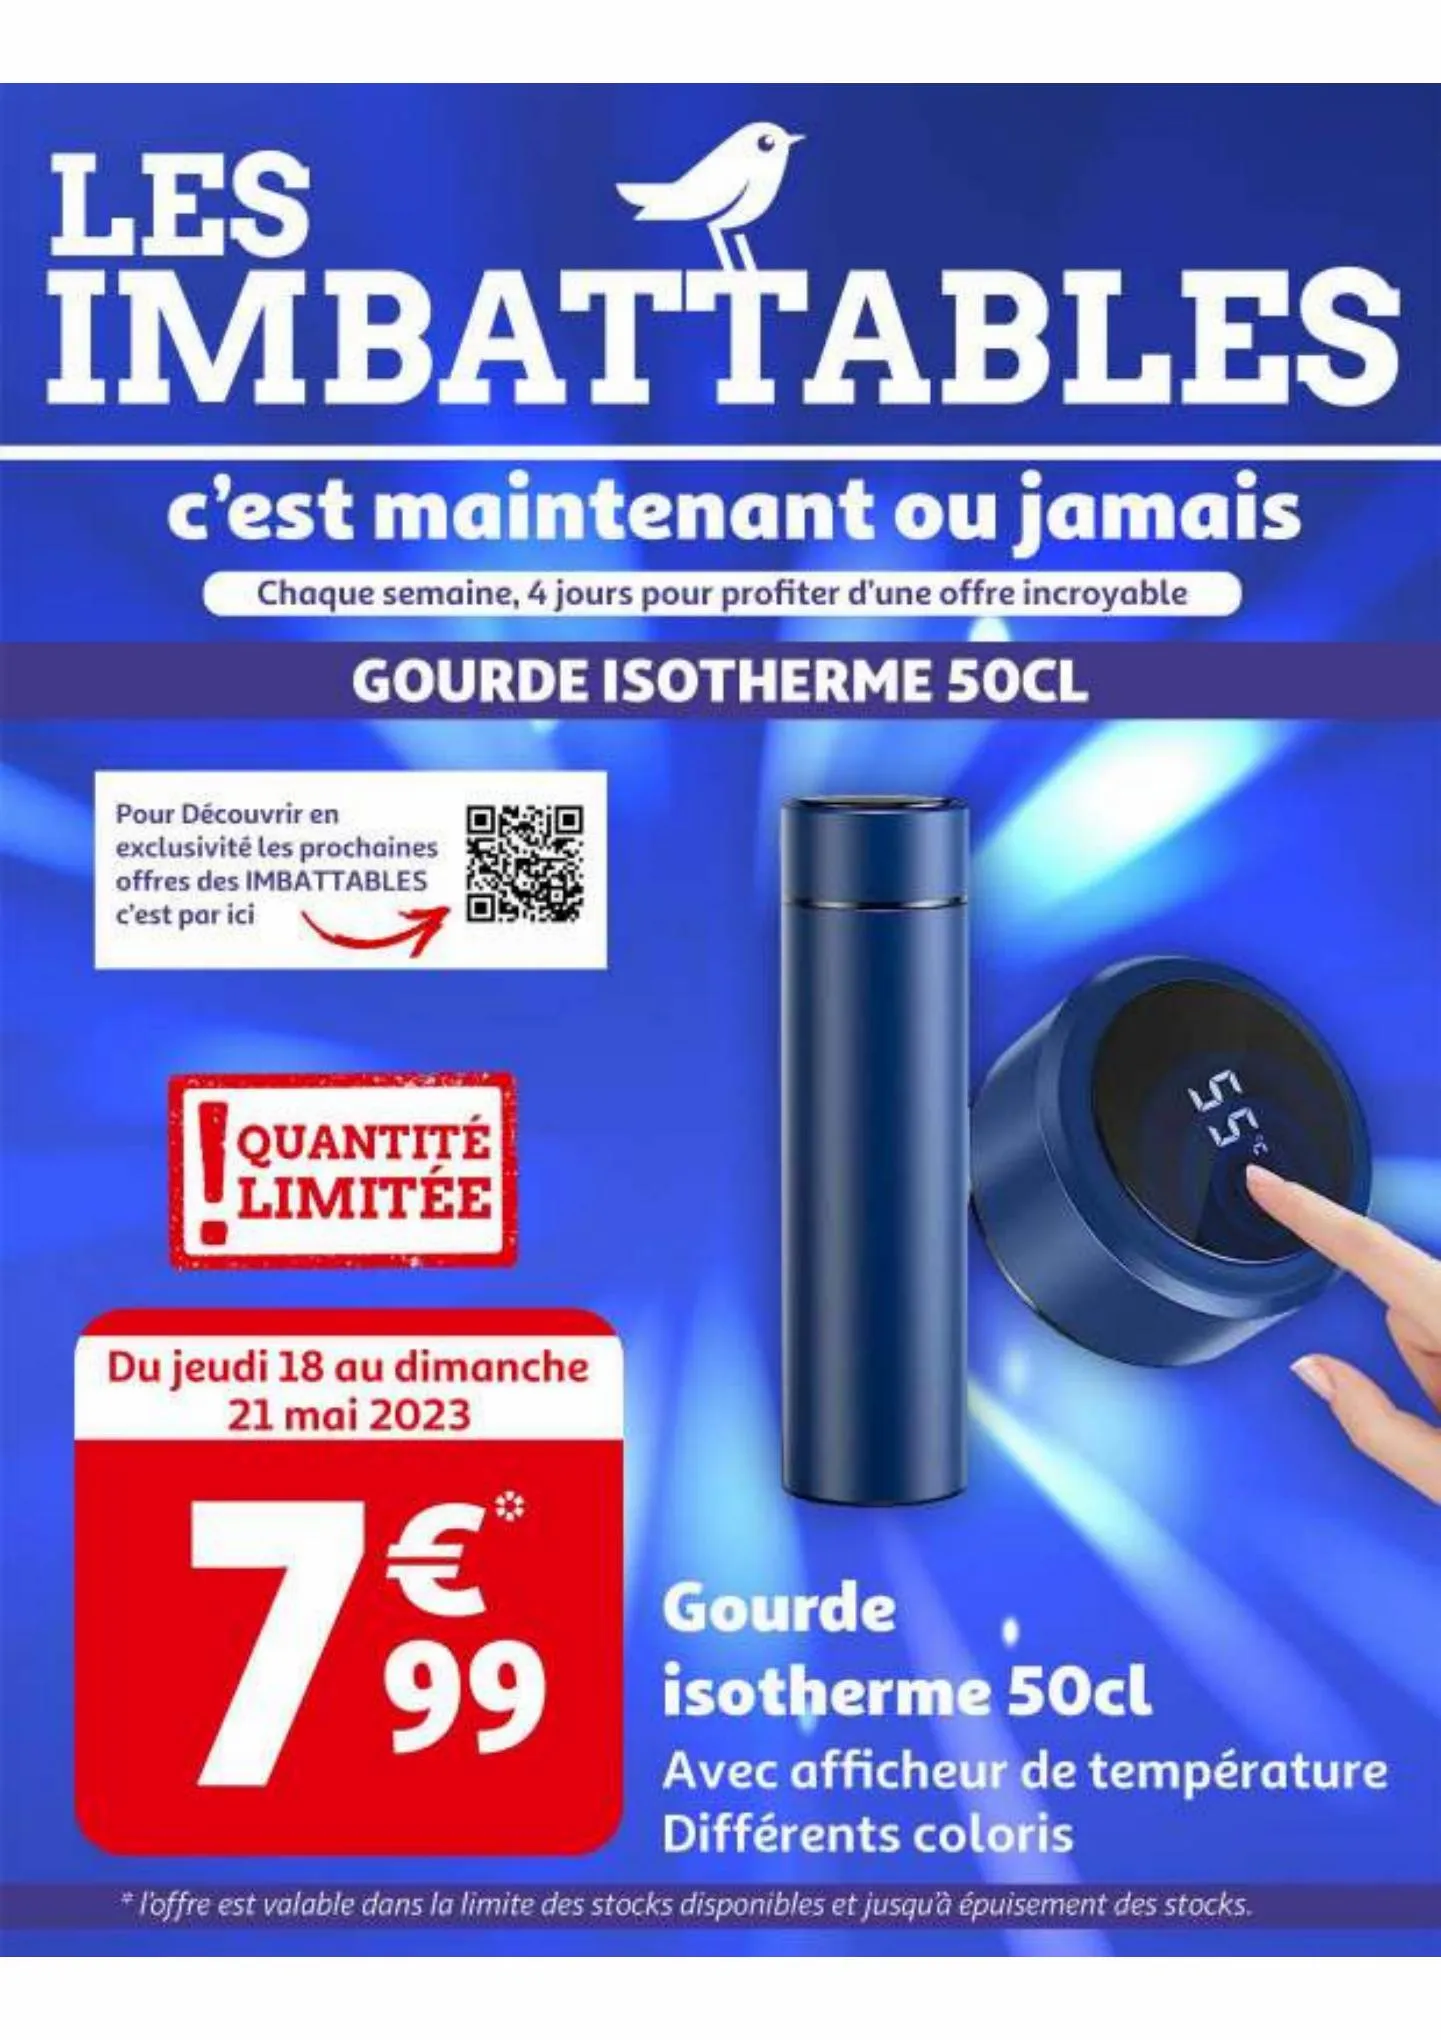 Catalogue Les imbattables, page 00001